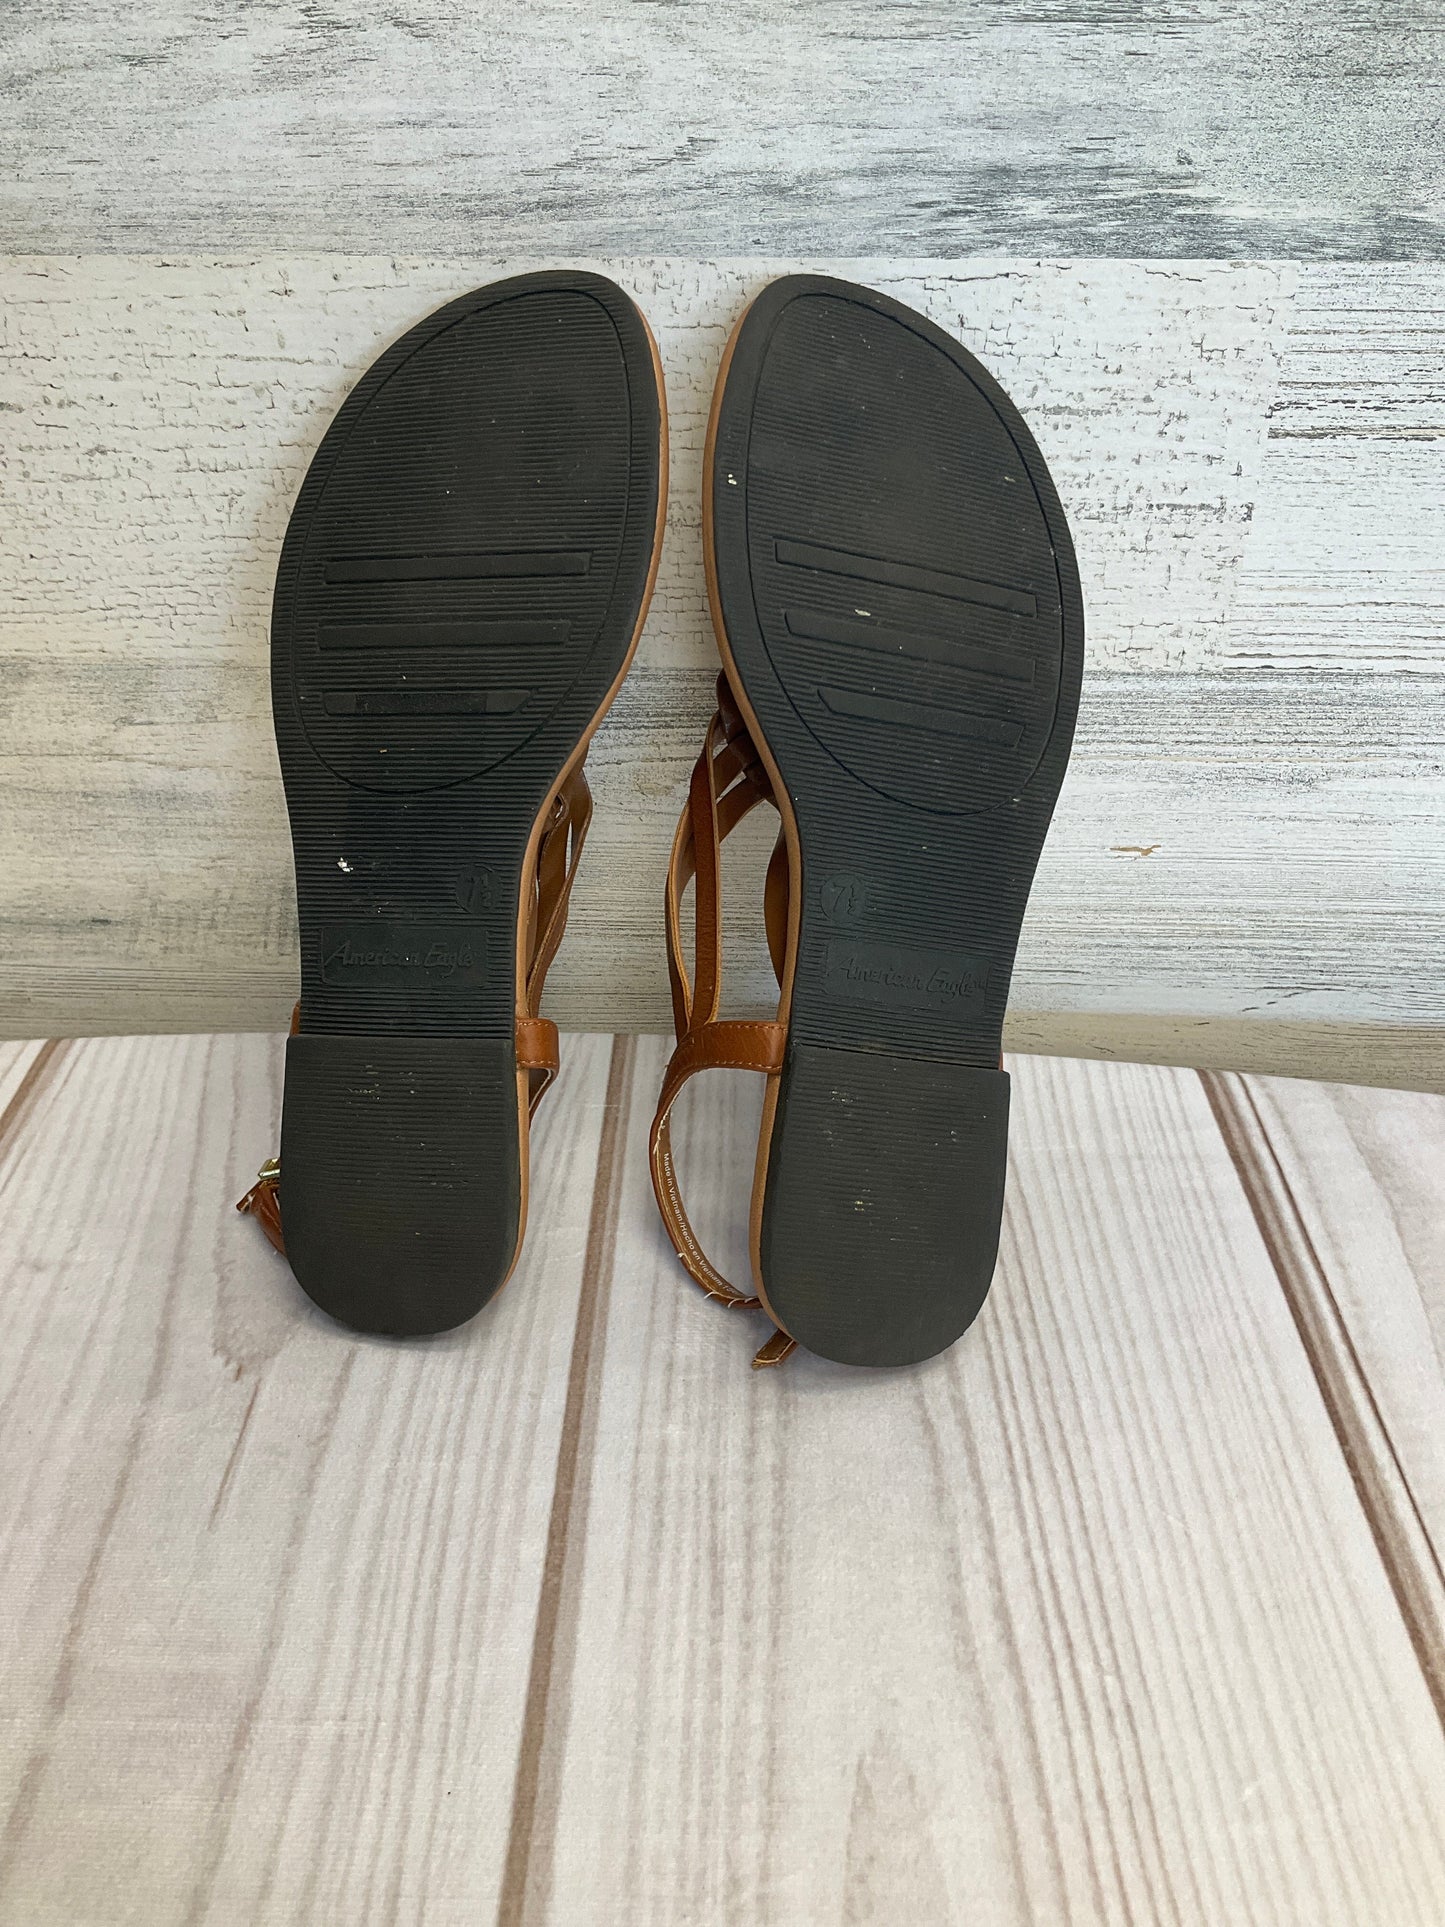 Sandals Flats By American Eagle  Size: 7.5